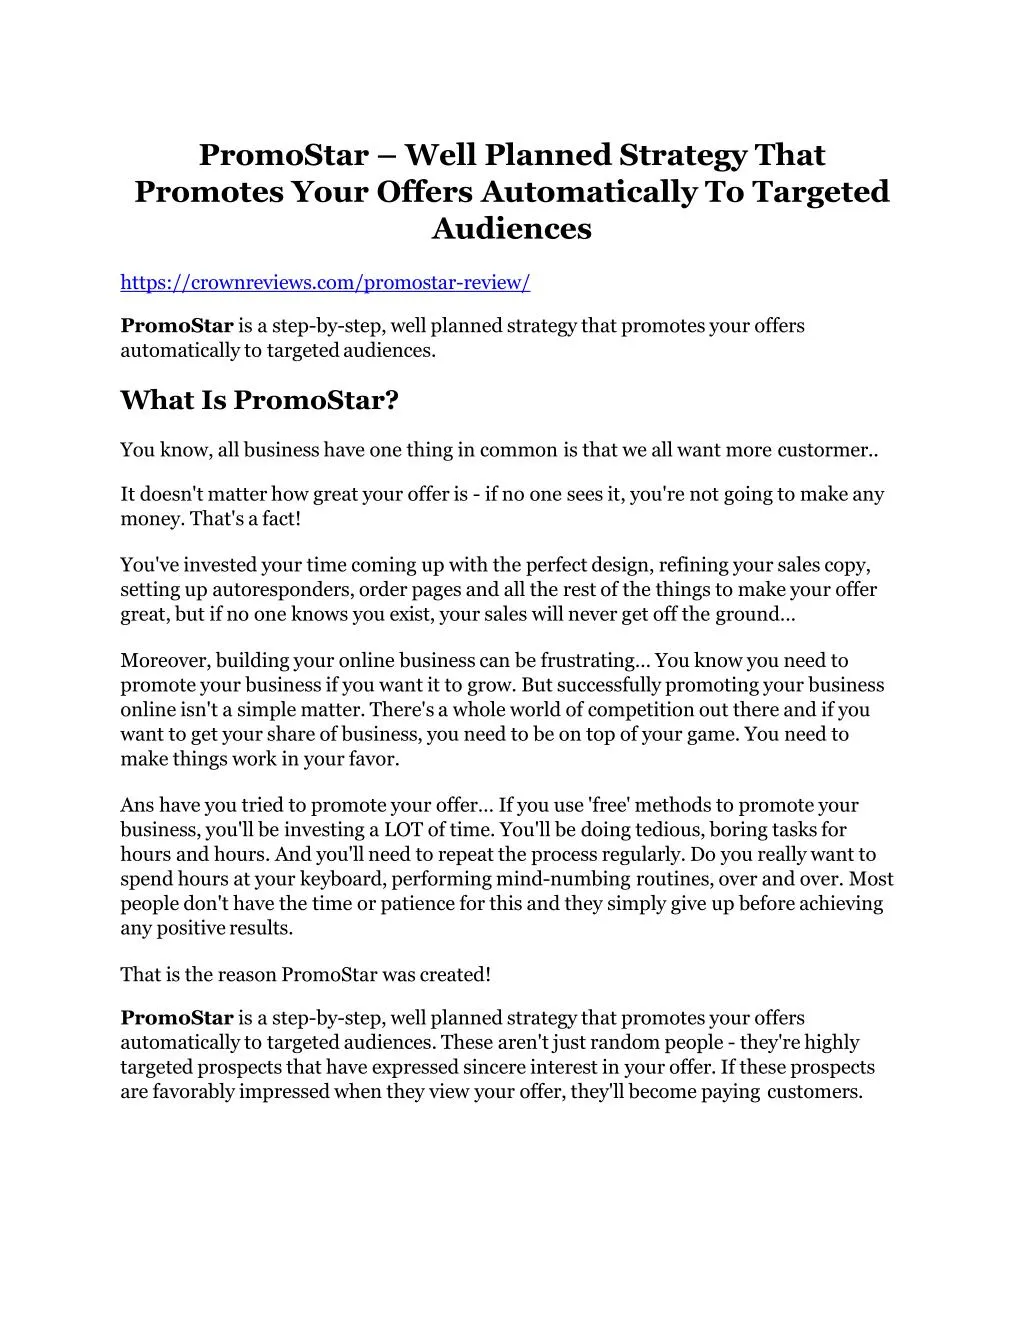 promostar well planned strategy that promotes